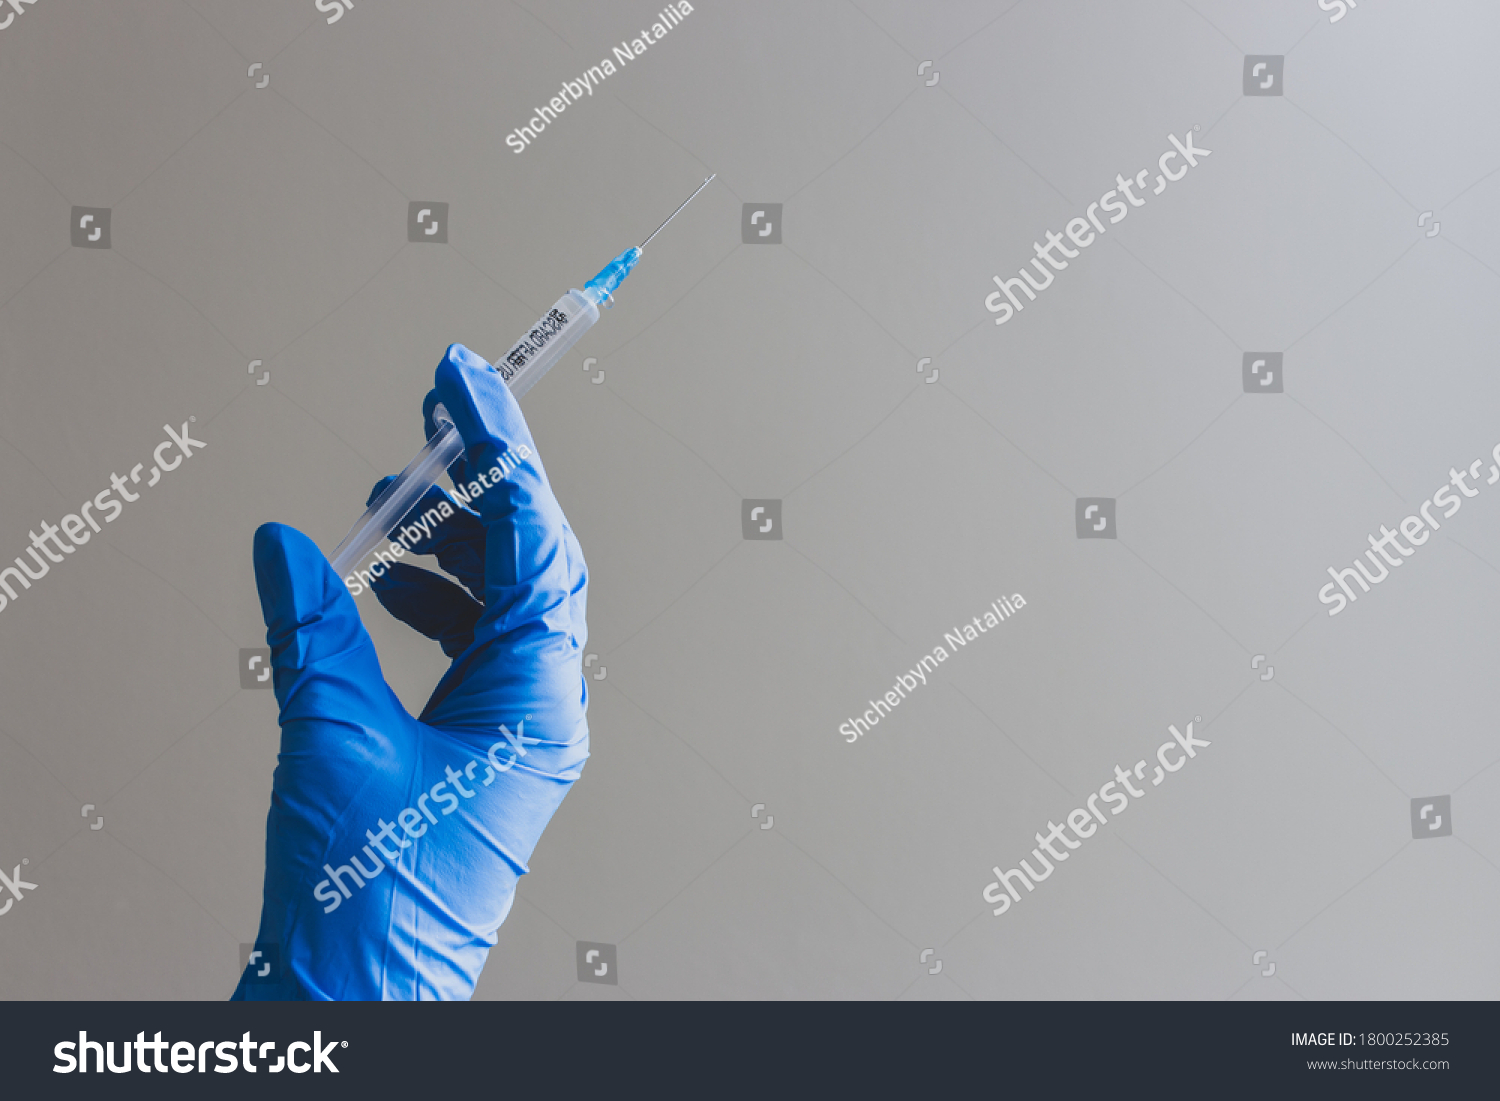 Hand in blue glove holding syringe with copy space. Syringe with sharp needle in hand. Medical treatment concept. Laboratory backgrouund. Medicare concept. Vaccination concept.  #1800252385